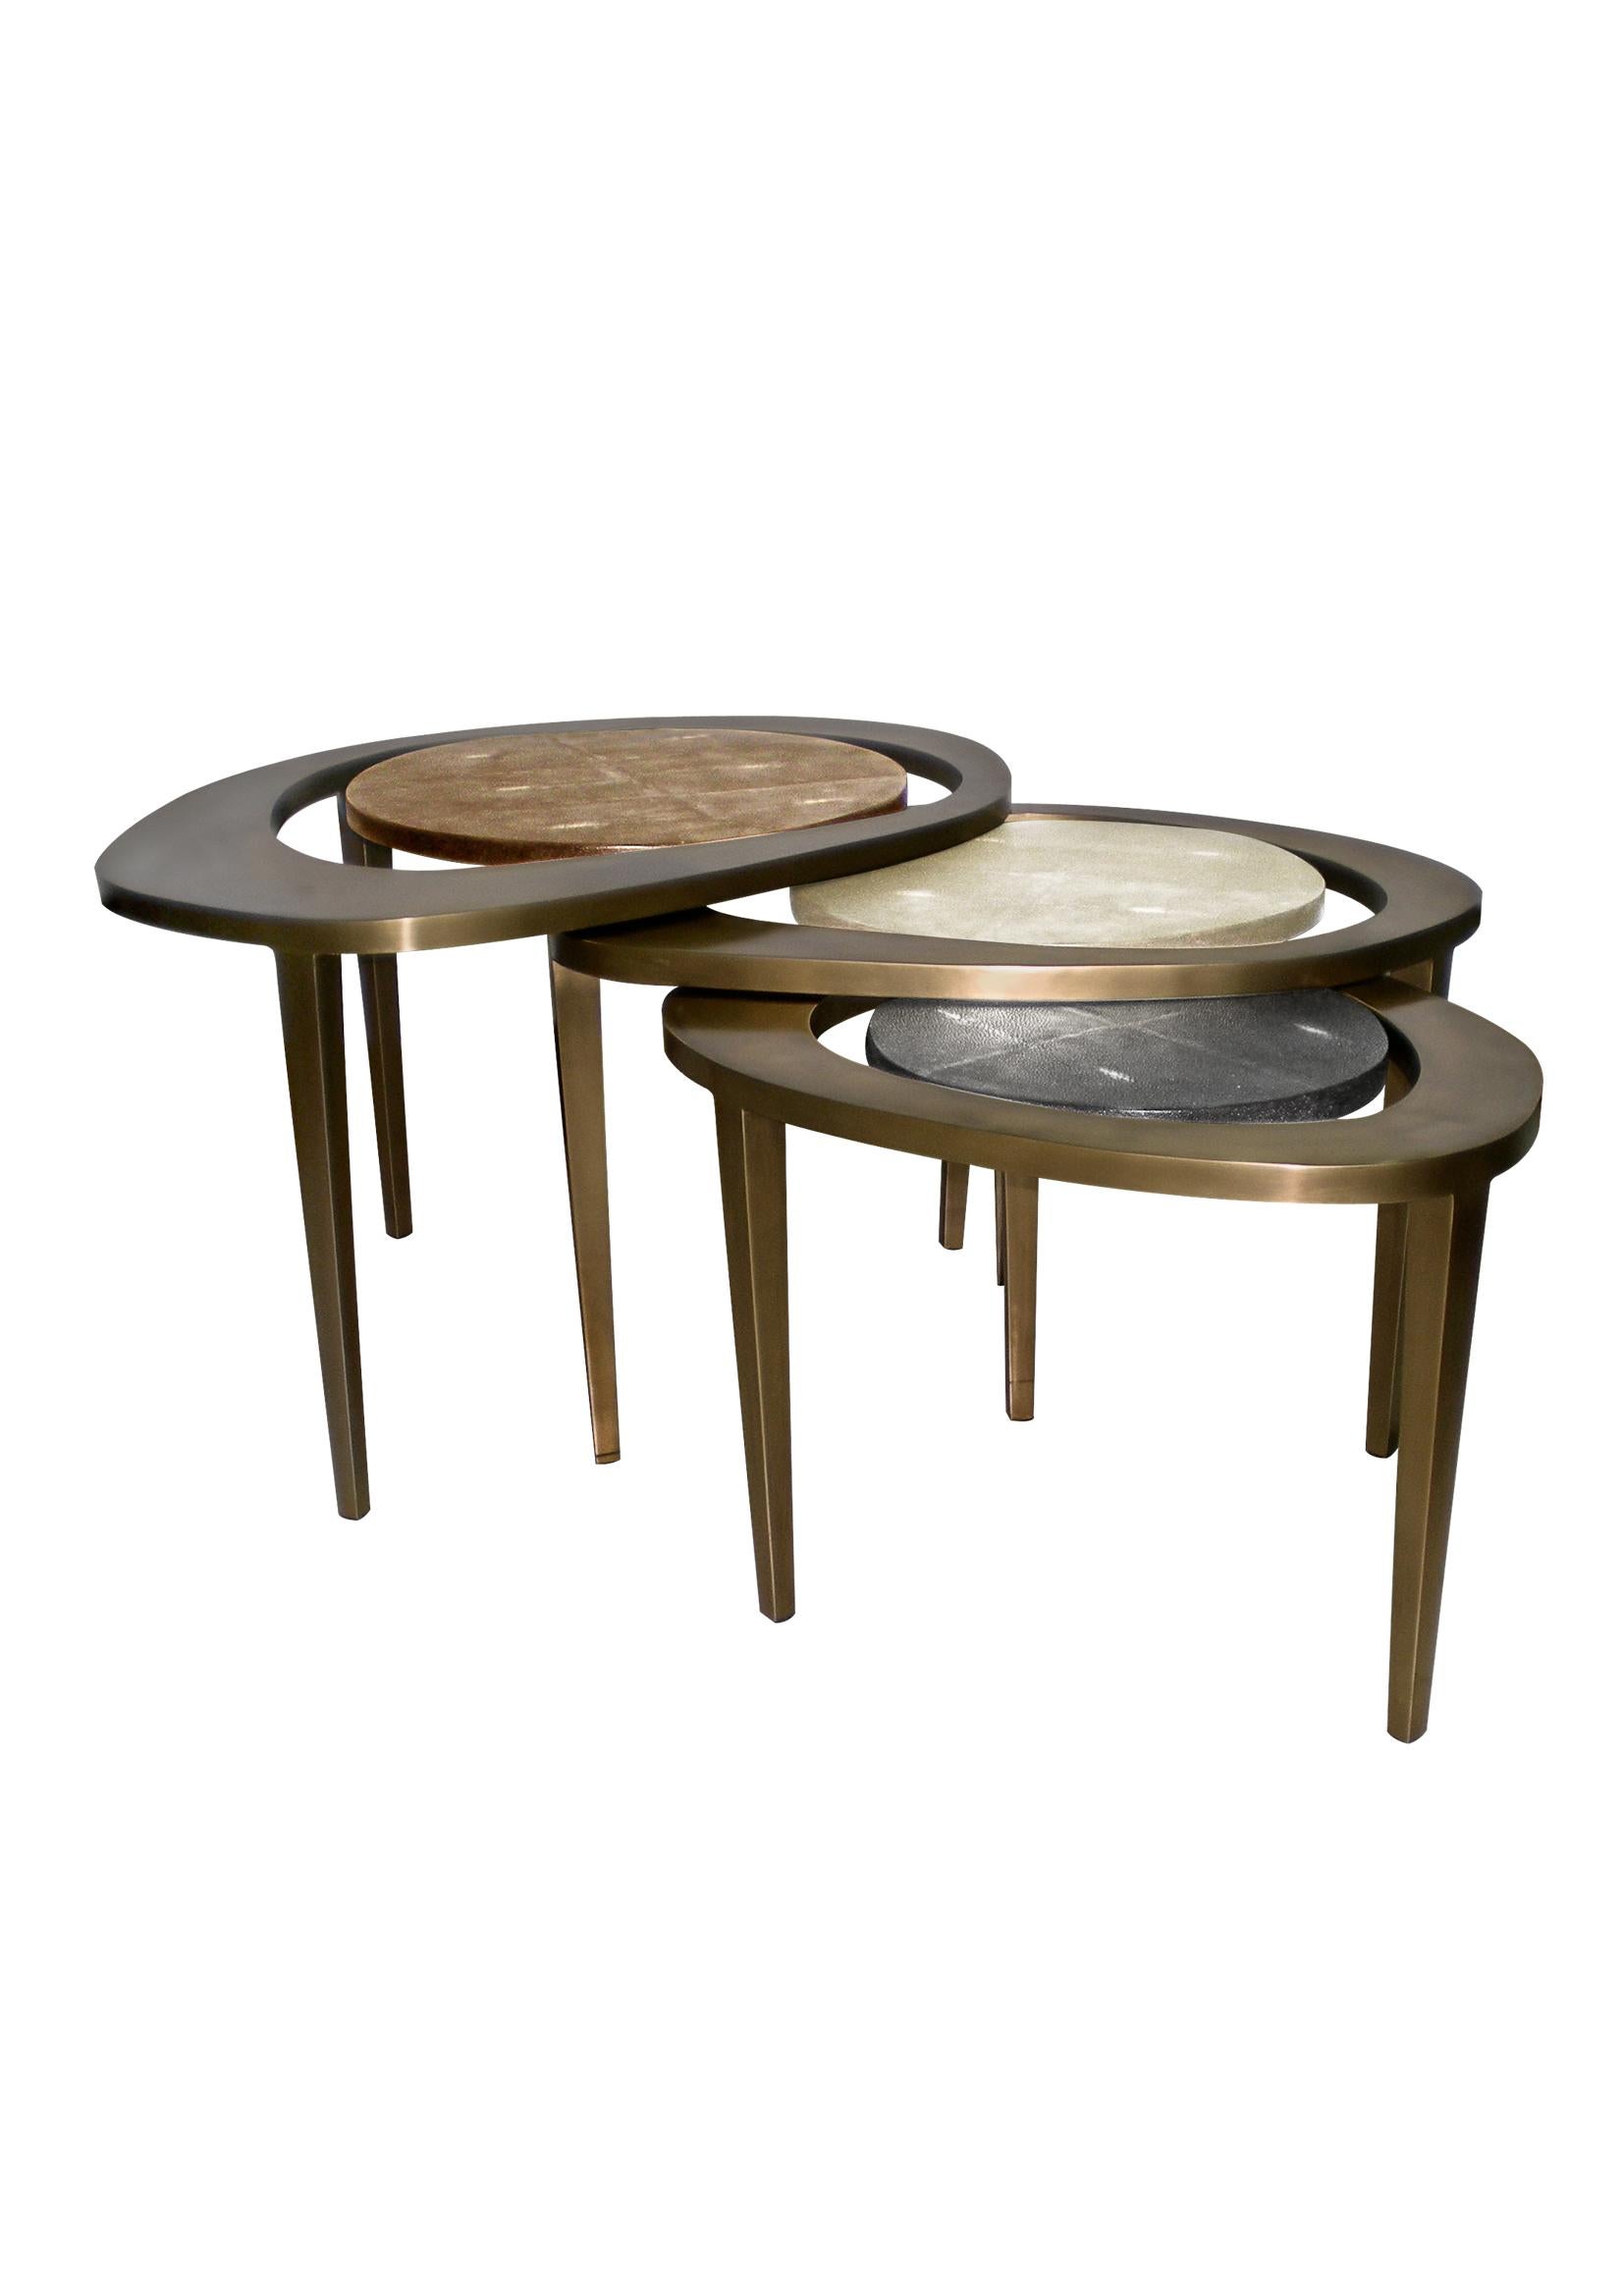 Set of 3 Peacock Nesting Side Tables in, Shagreen, Shell & Brass by R&Y Augousti For Sale 8